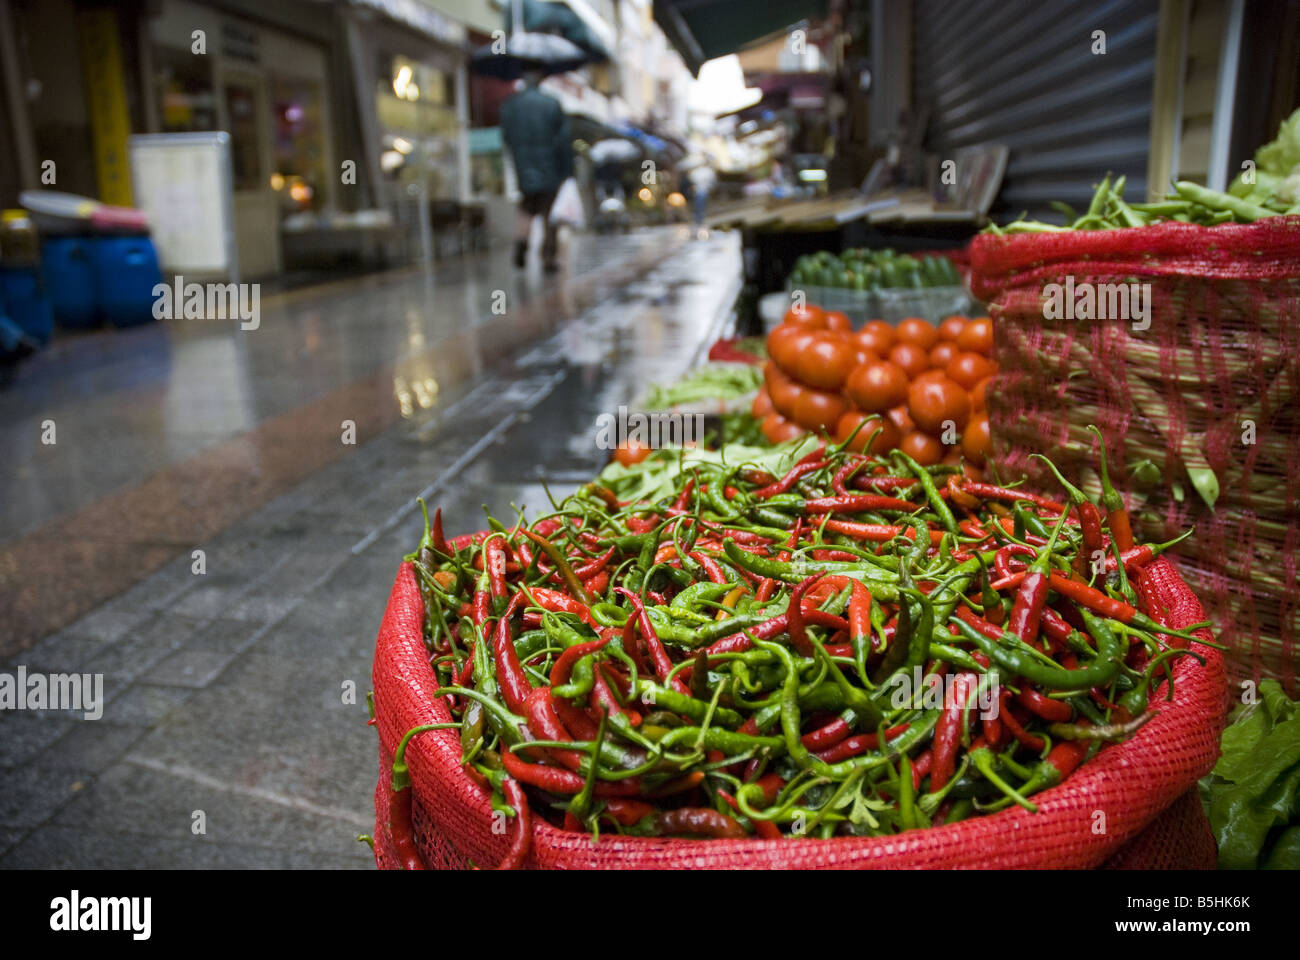 A bag of chillies for sale in the Karakoy bazaar on the Asian side of Istanbul, Turkey. Stock Photo